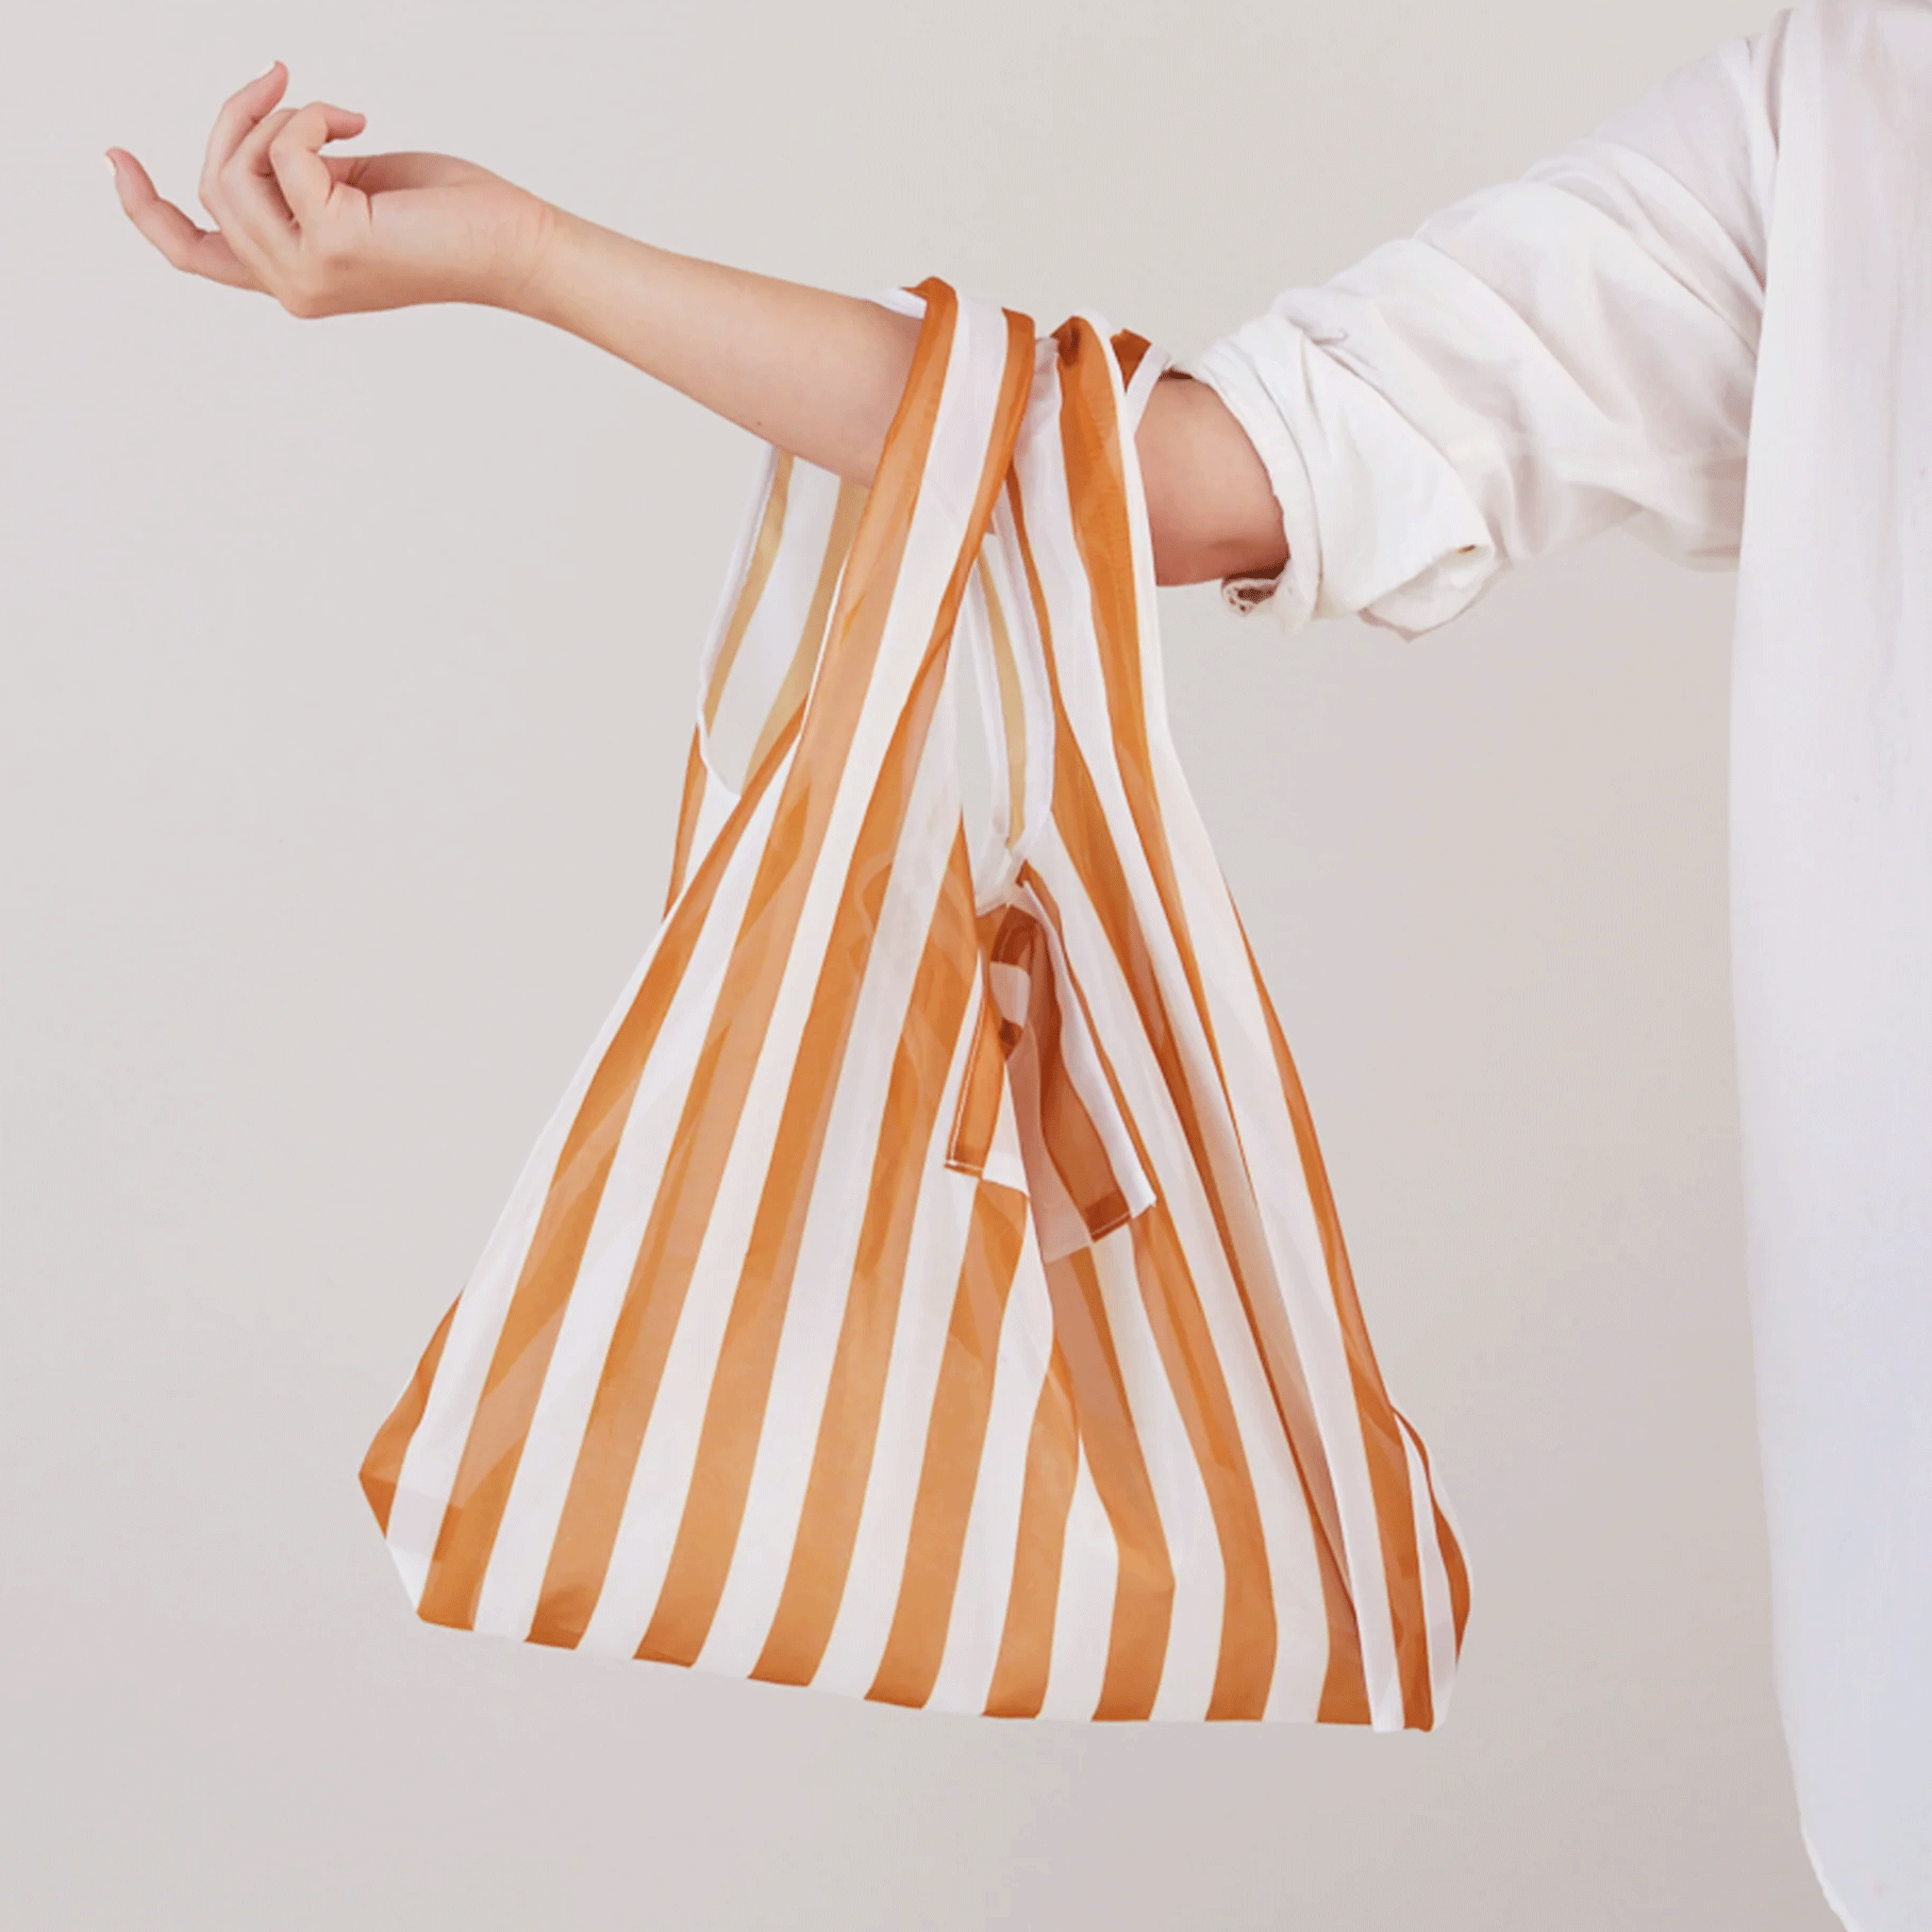 On a white background is a white and orange striped nylon tote. 